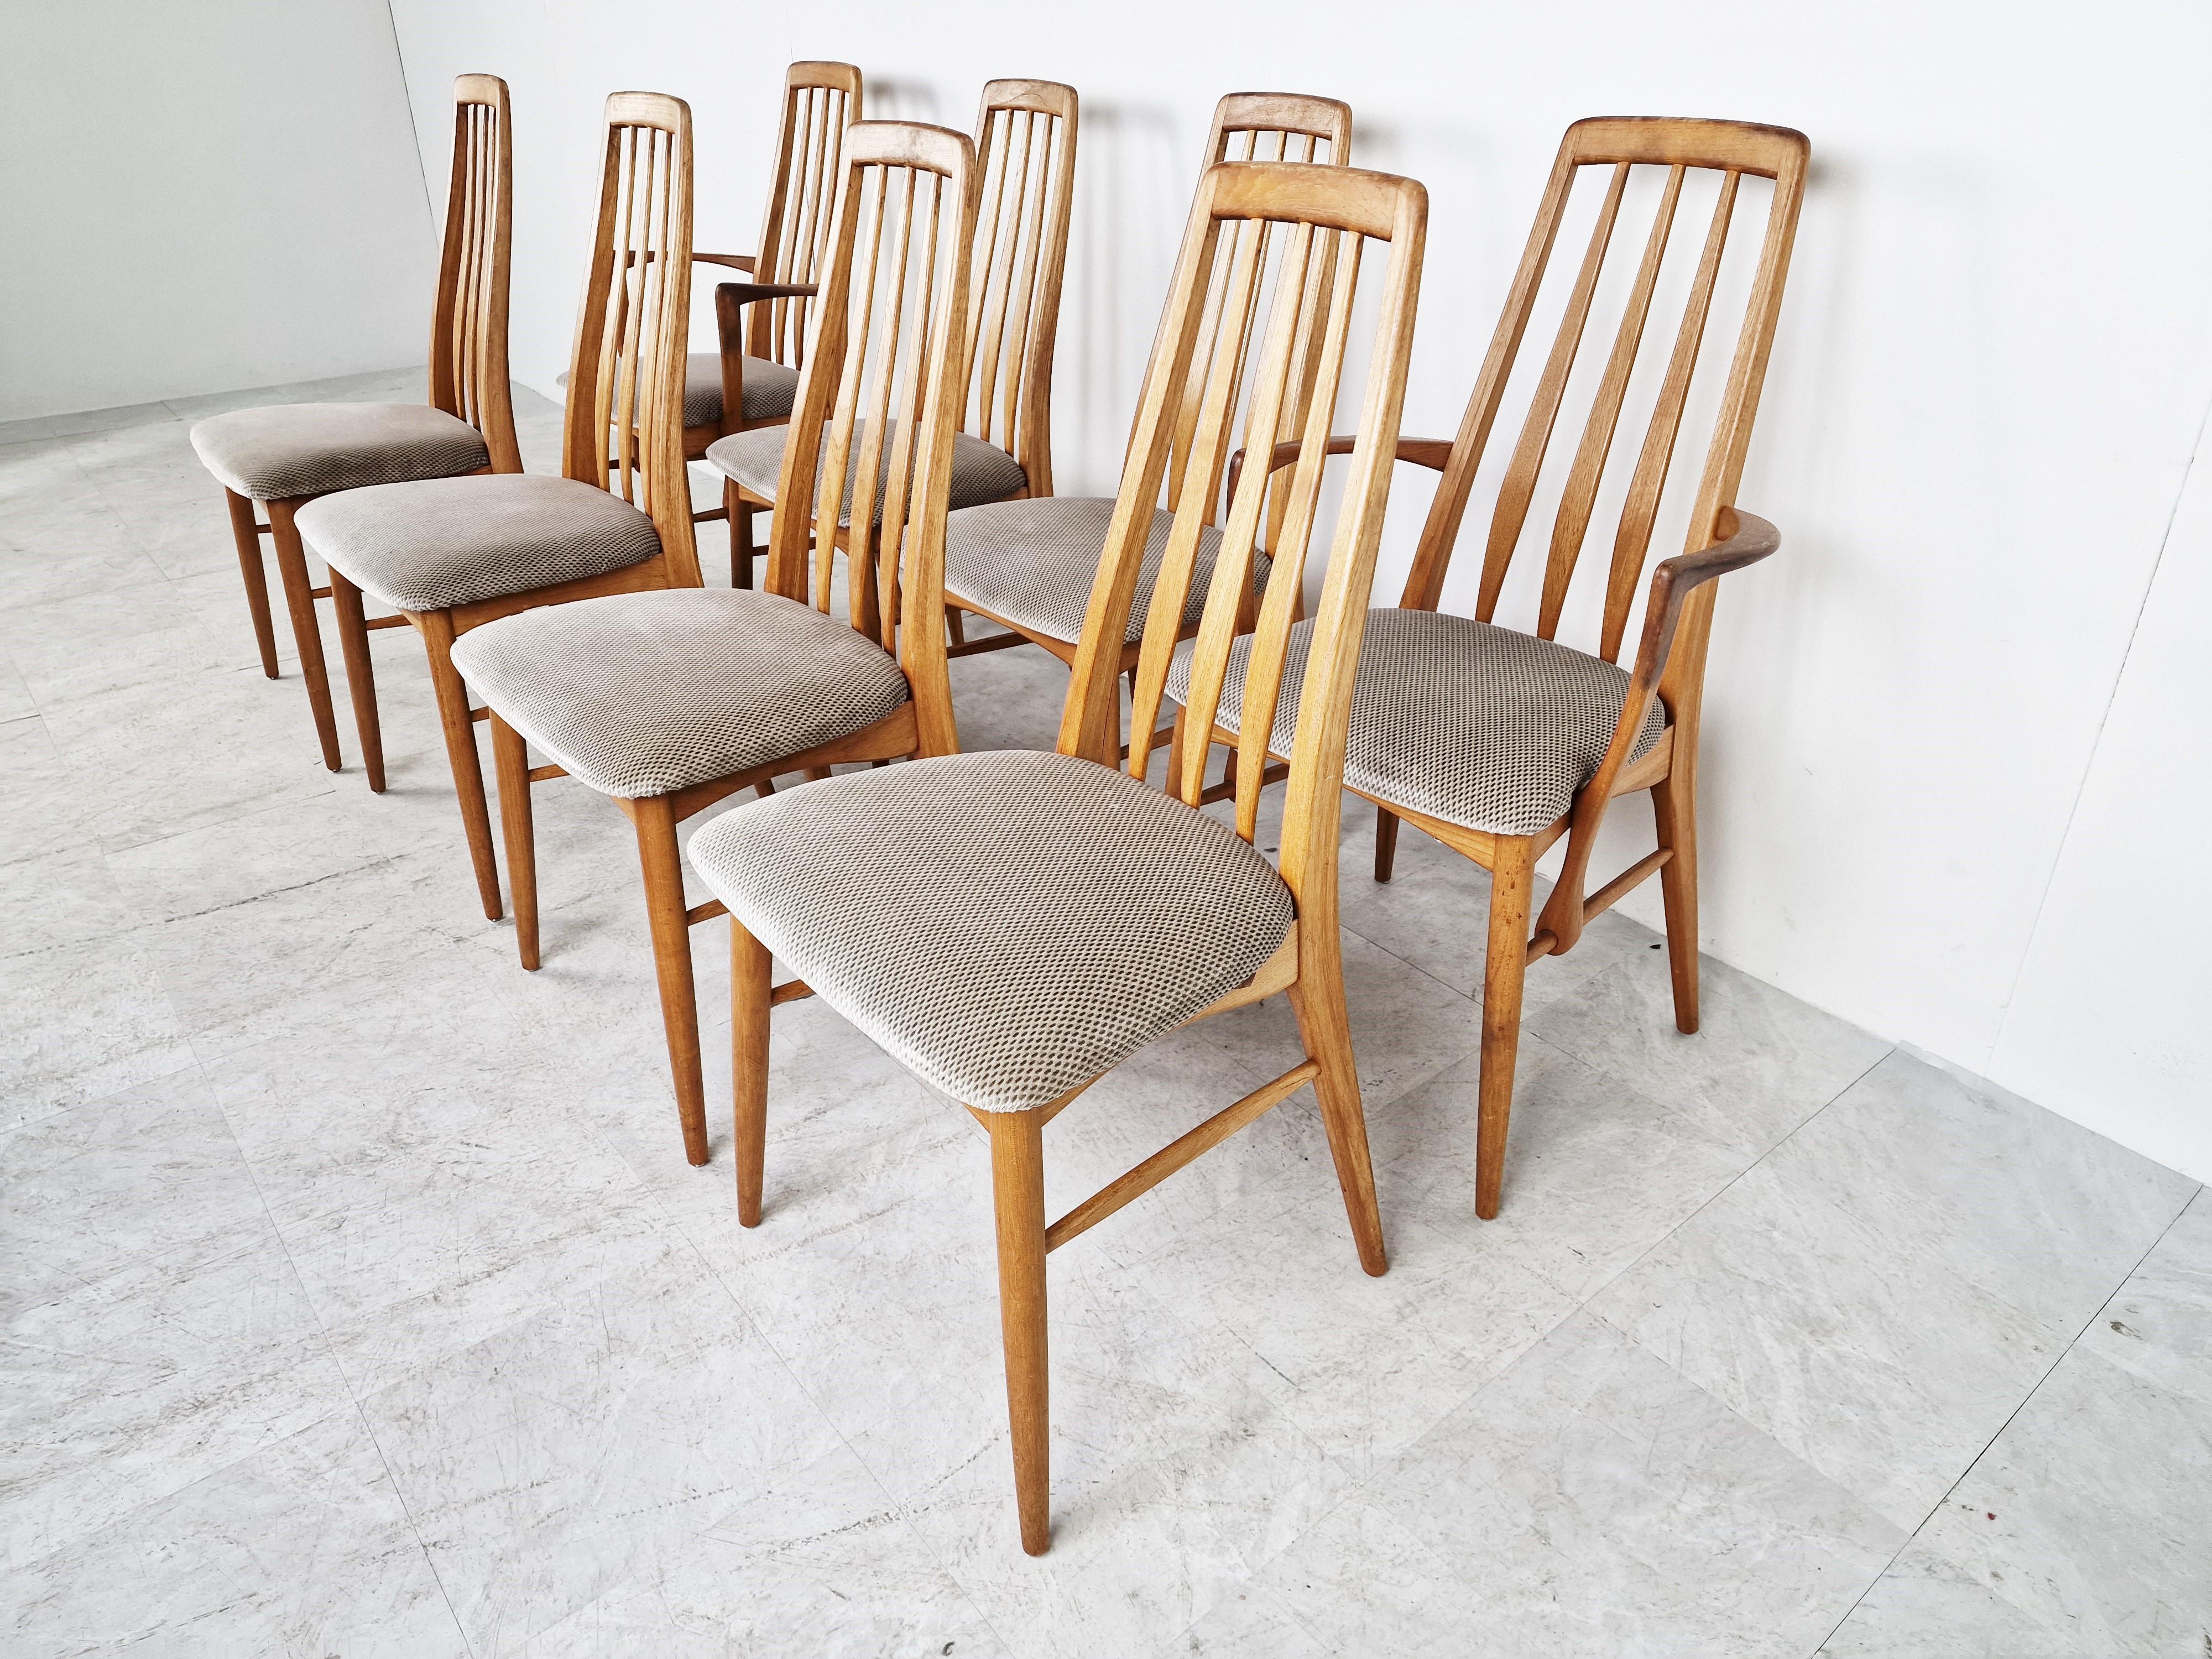 Set of 6 dining chairs, model EVA by Niels Kofoed, Denmark 1